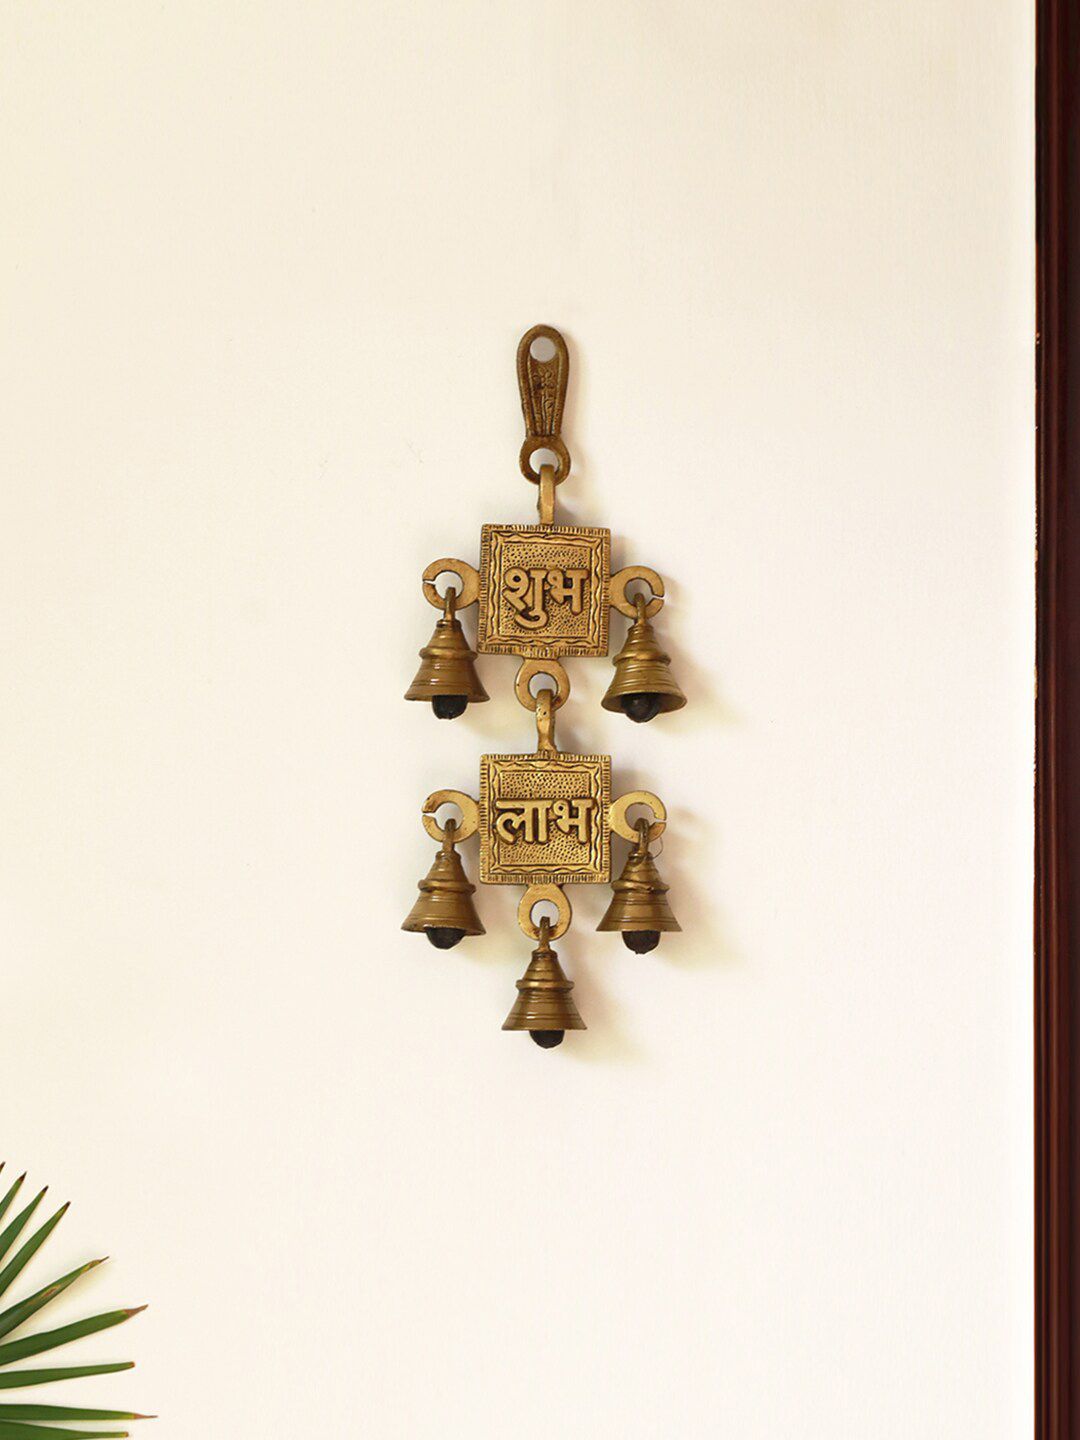 ExclusiveLane Gold-Toned Shubh Labh Wall Decor Price in India